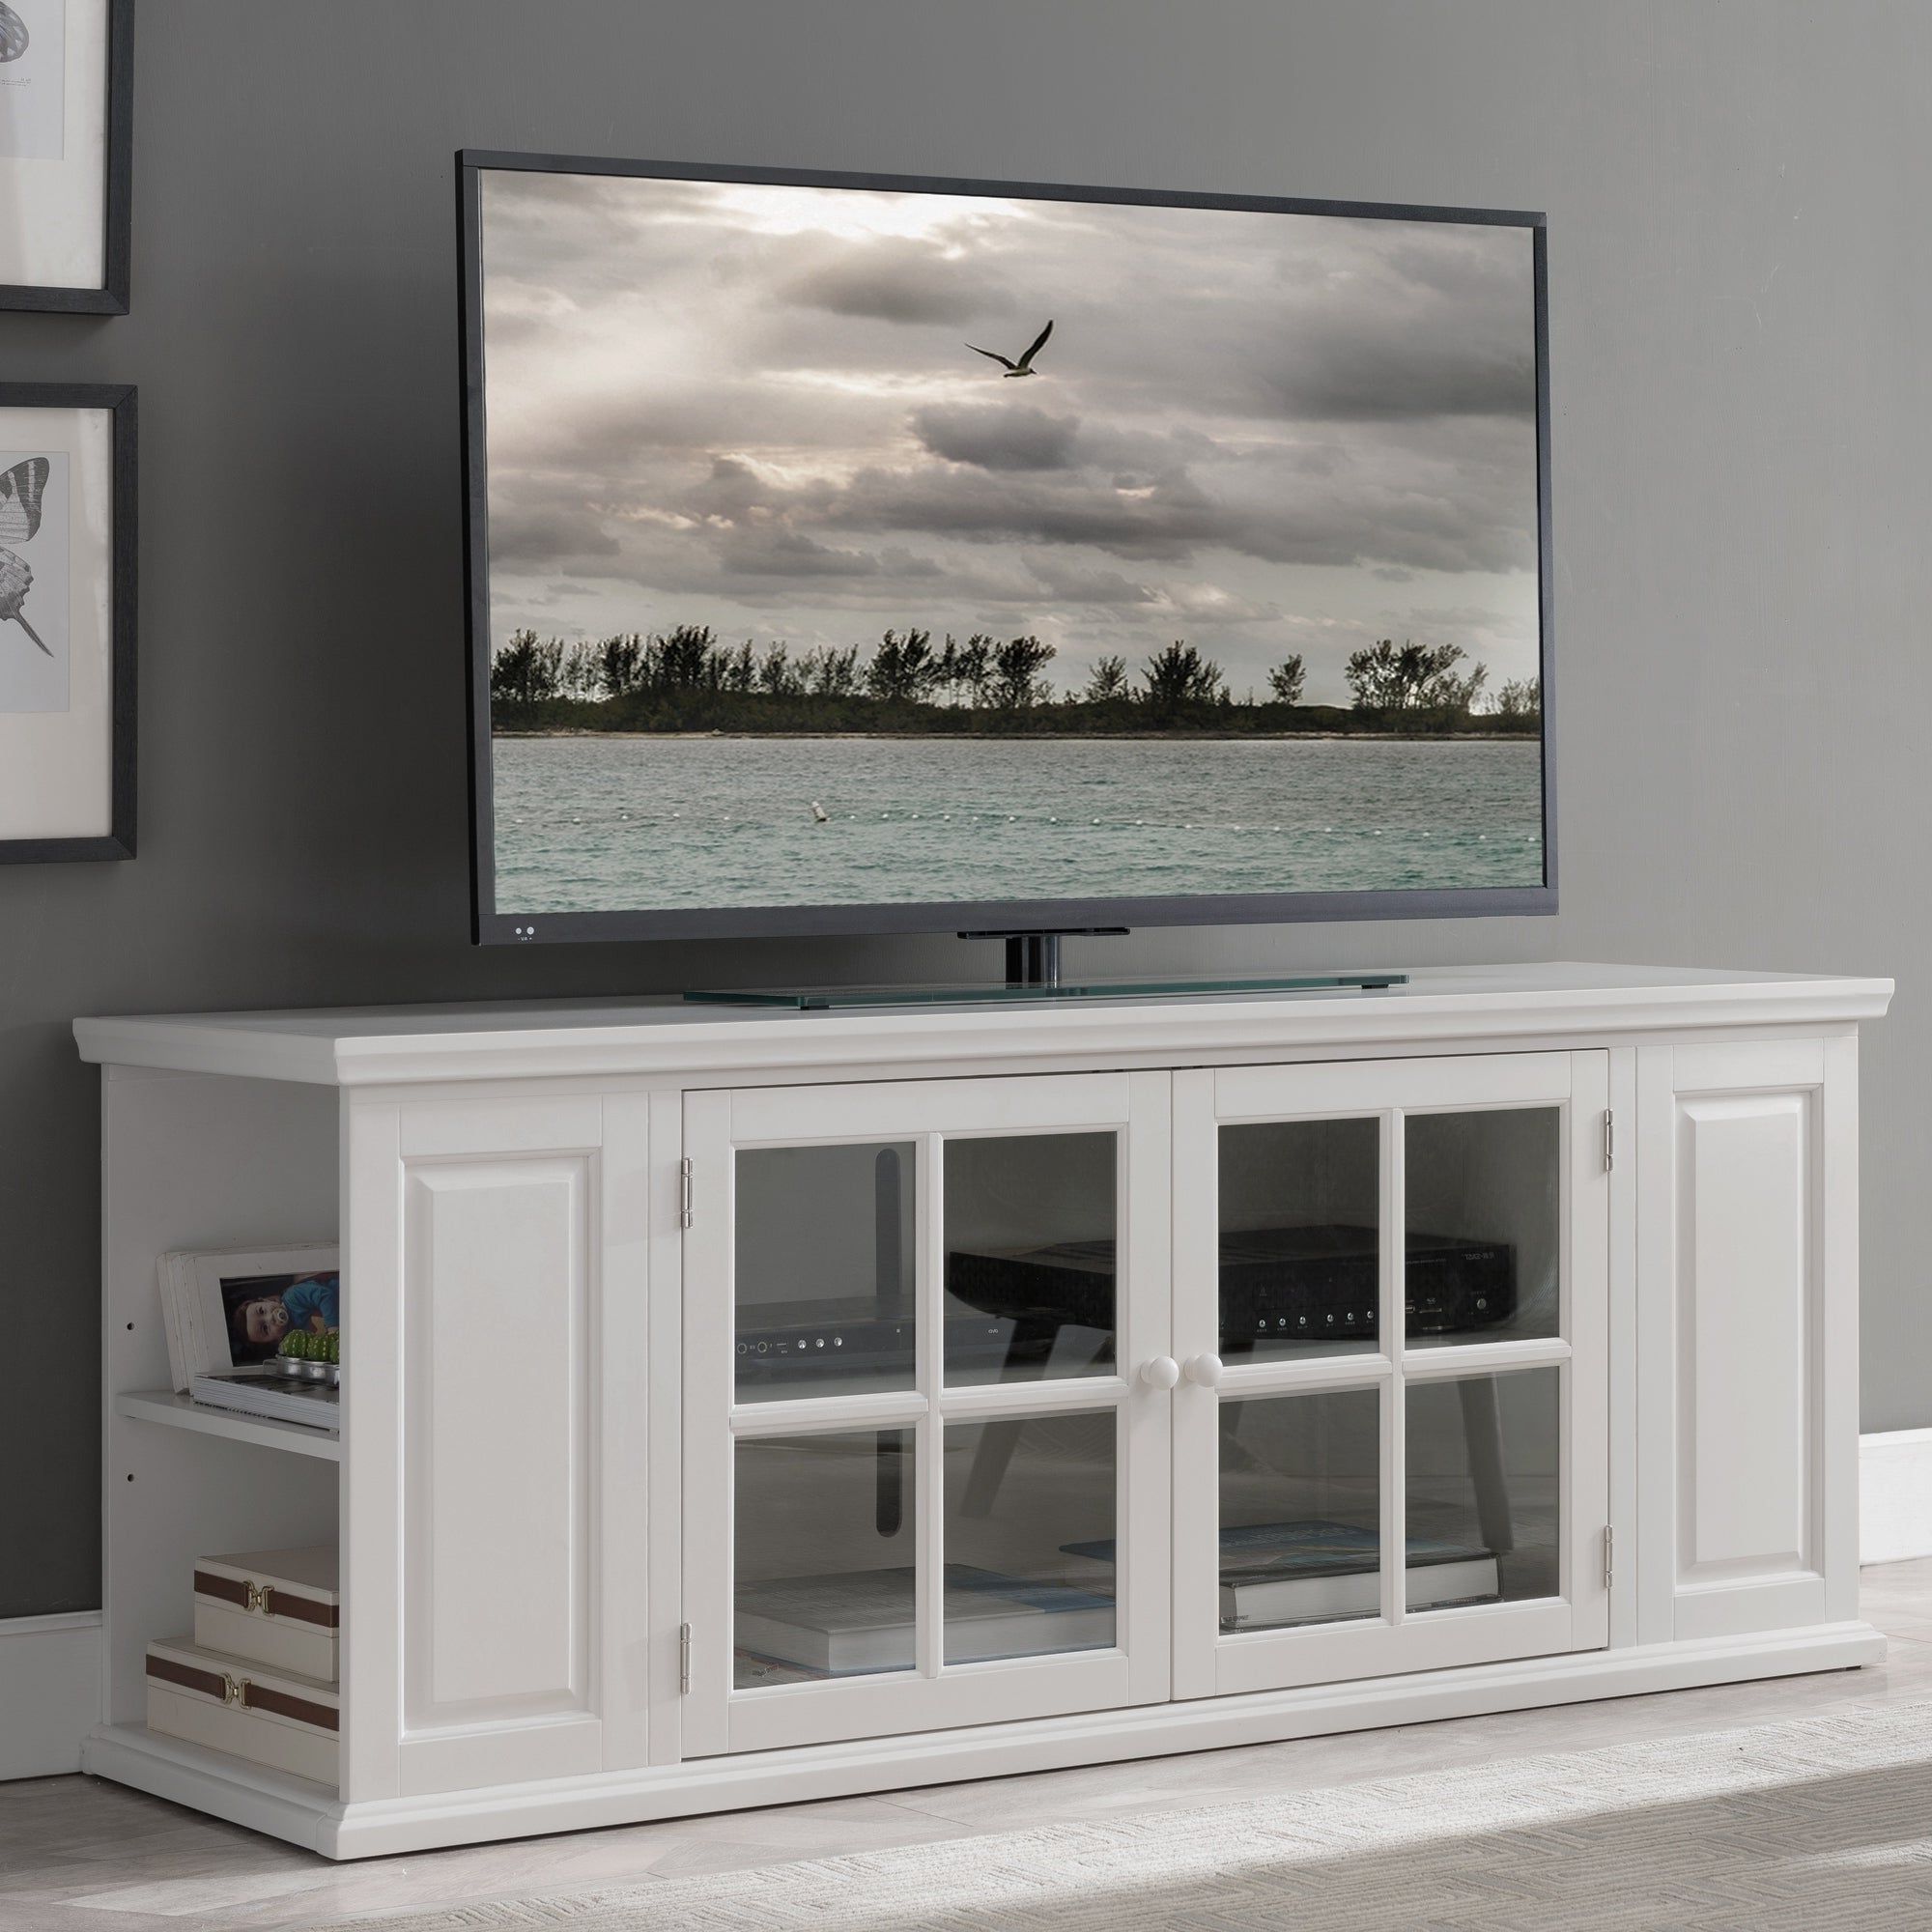 Cottage White 62 Inch Tv Stand – 62 Inches White In Bromley White Wide Tv Stands (Gallery 6 of 20)